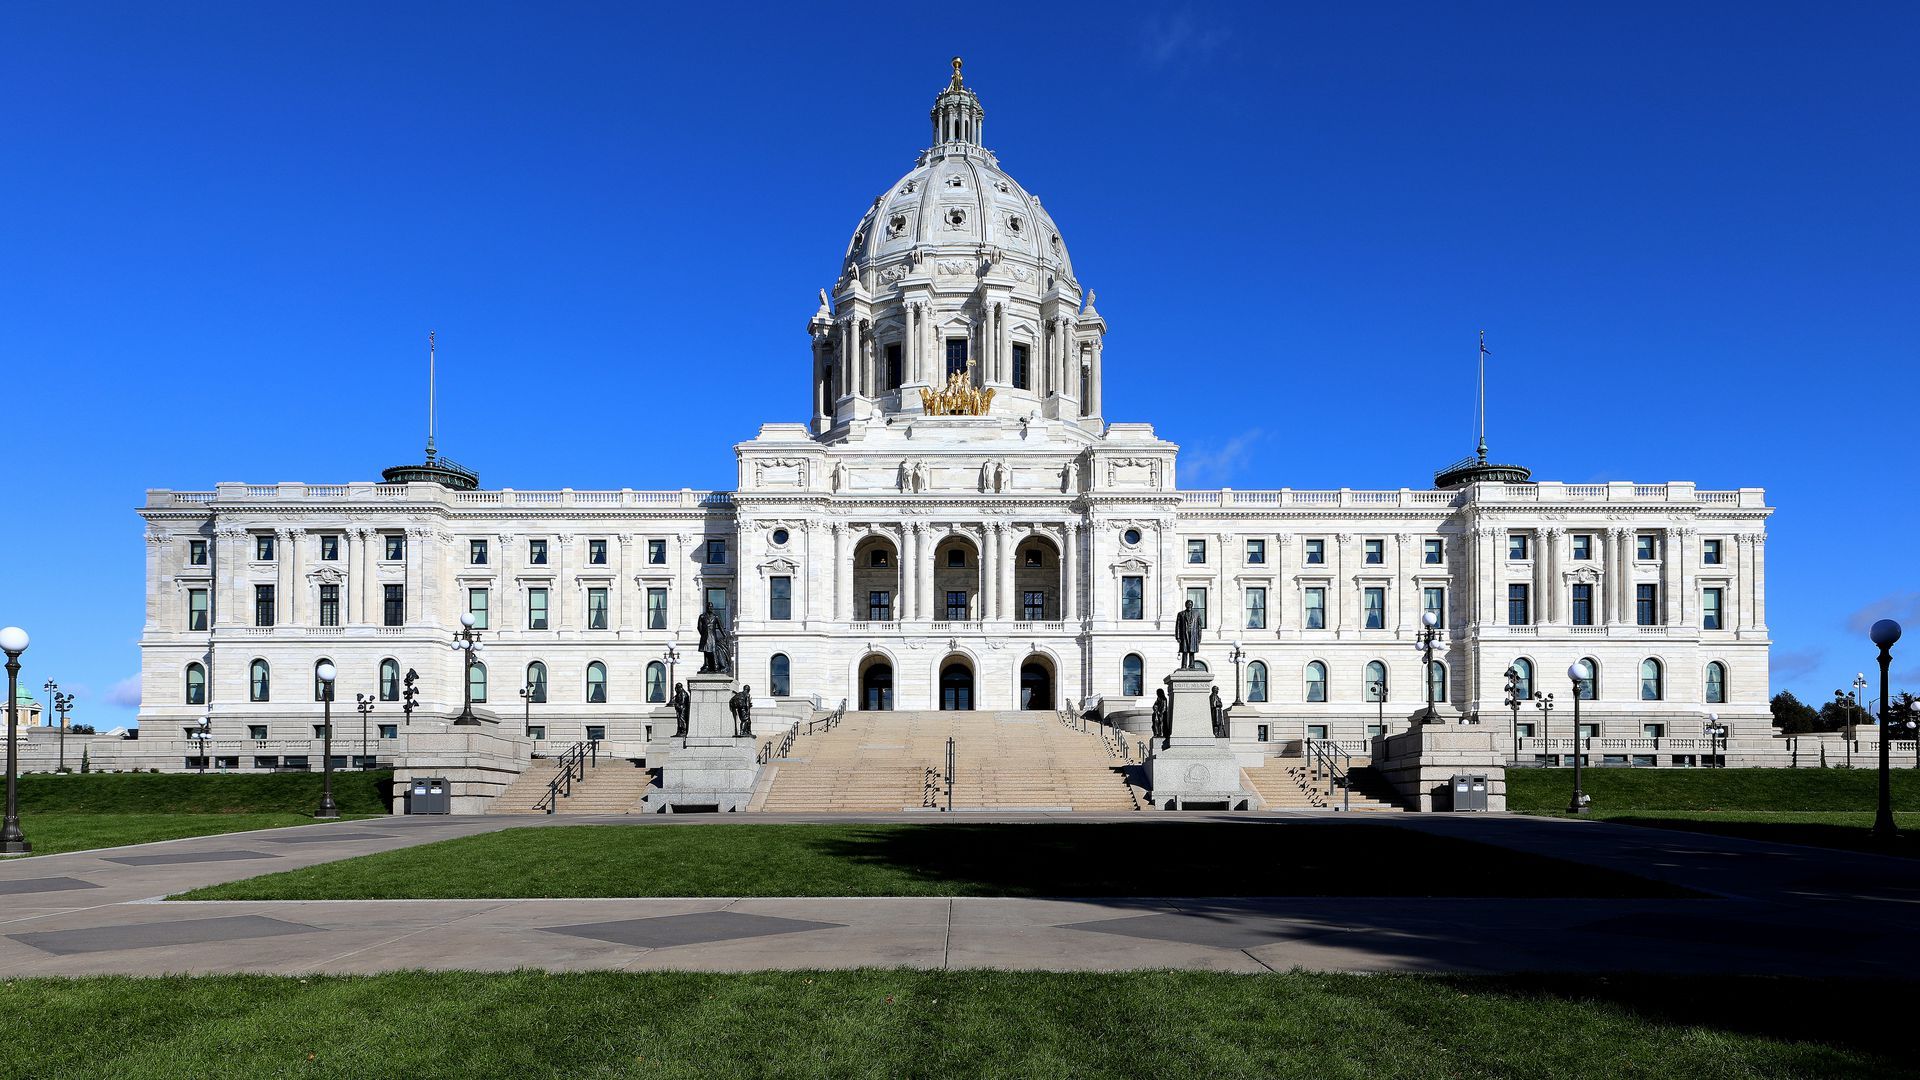 The Minnesota state Capitol building